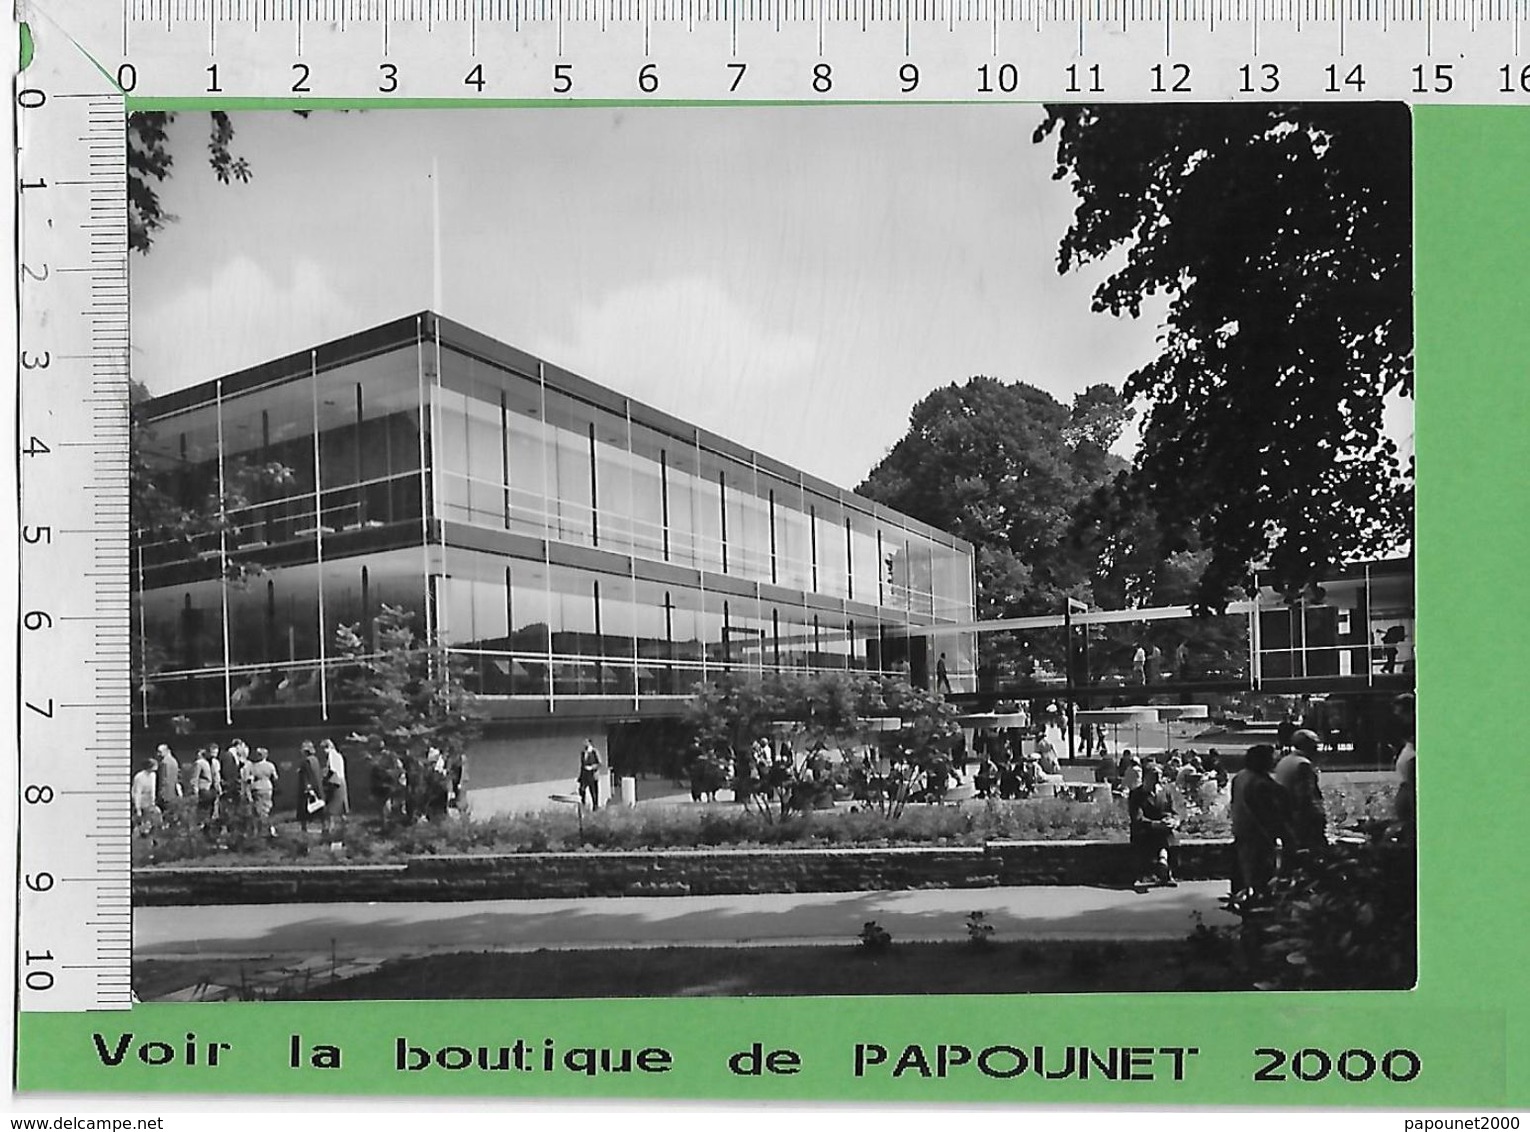 000478-E BE04 1000-EXPO 58 - Expositions Universelles